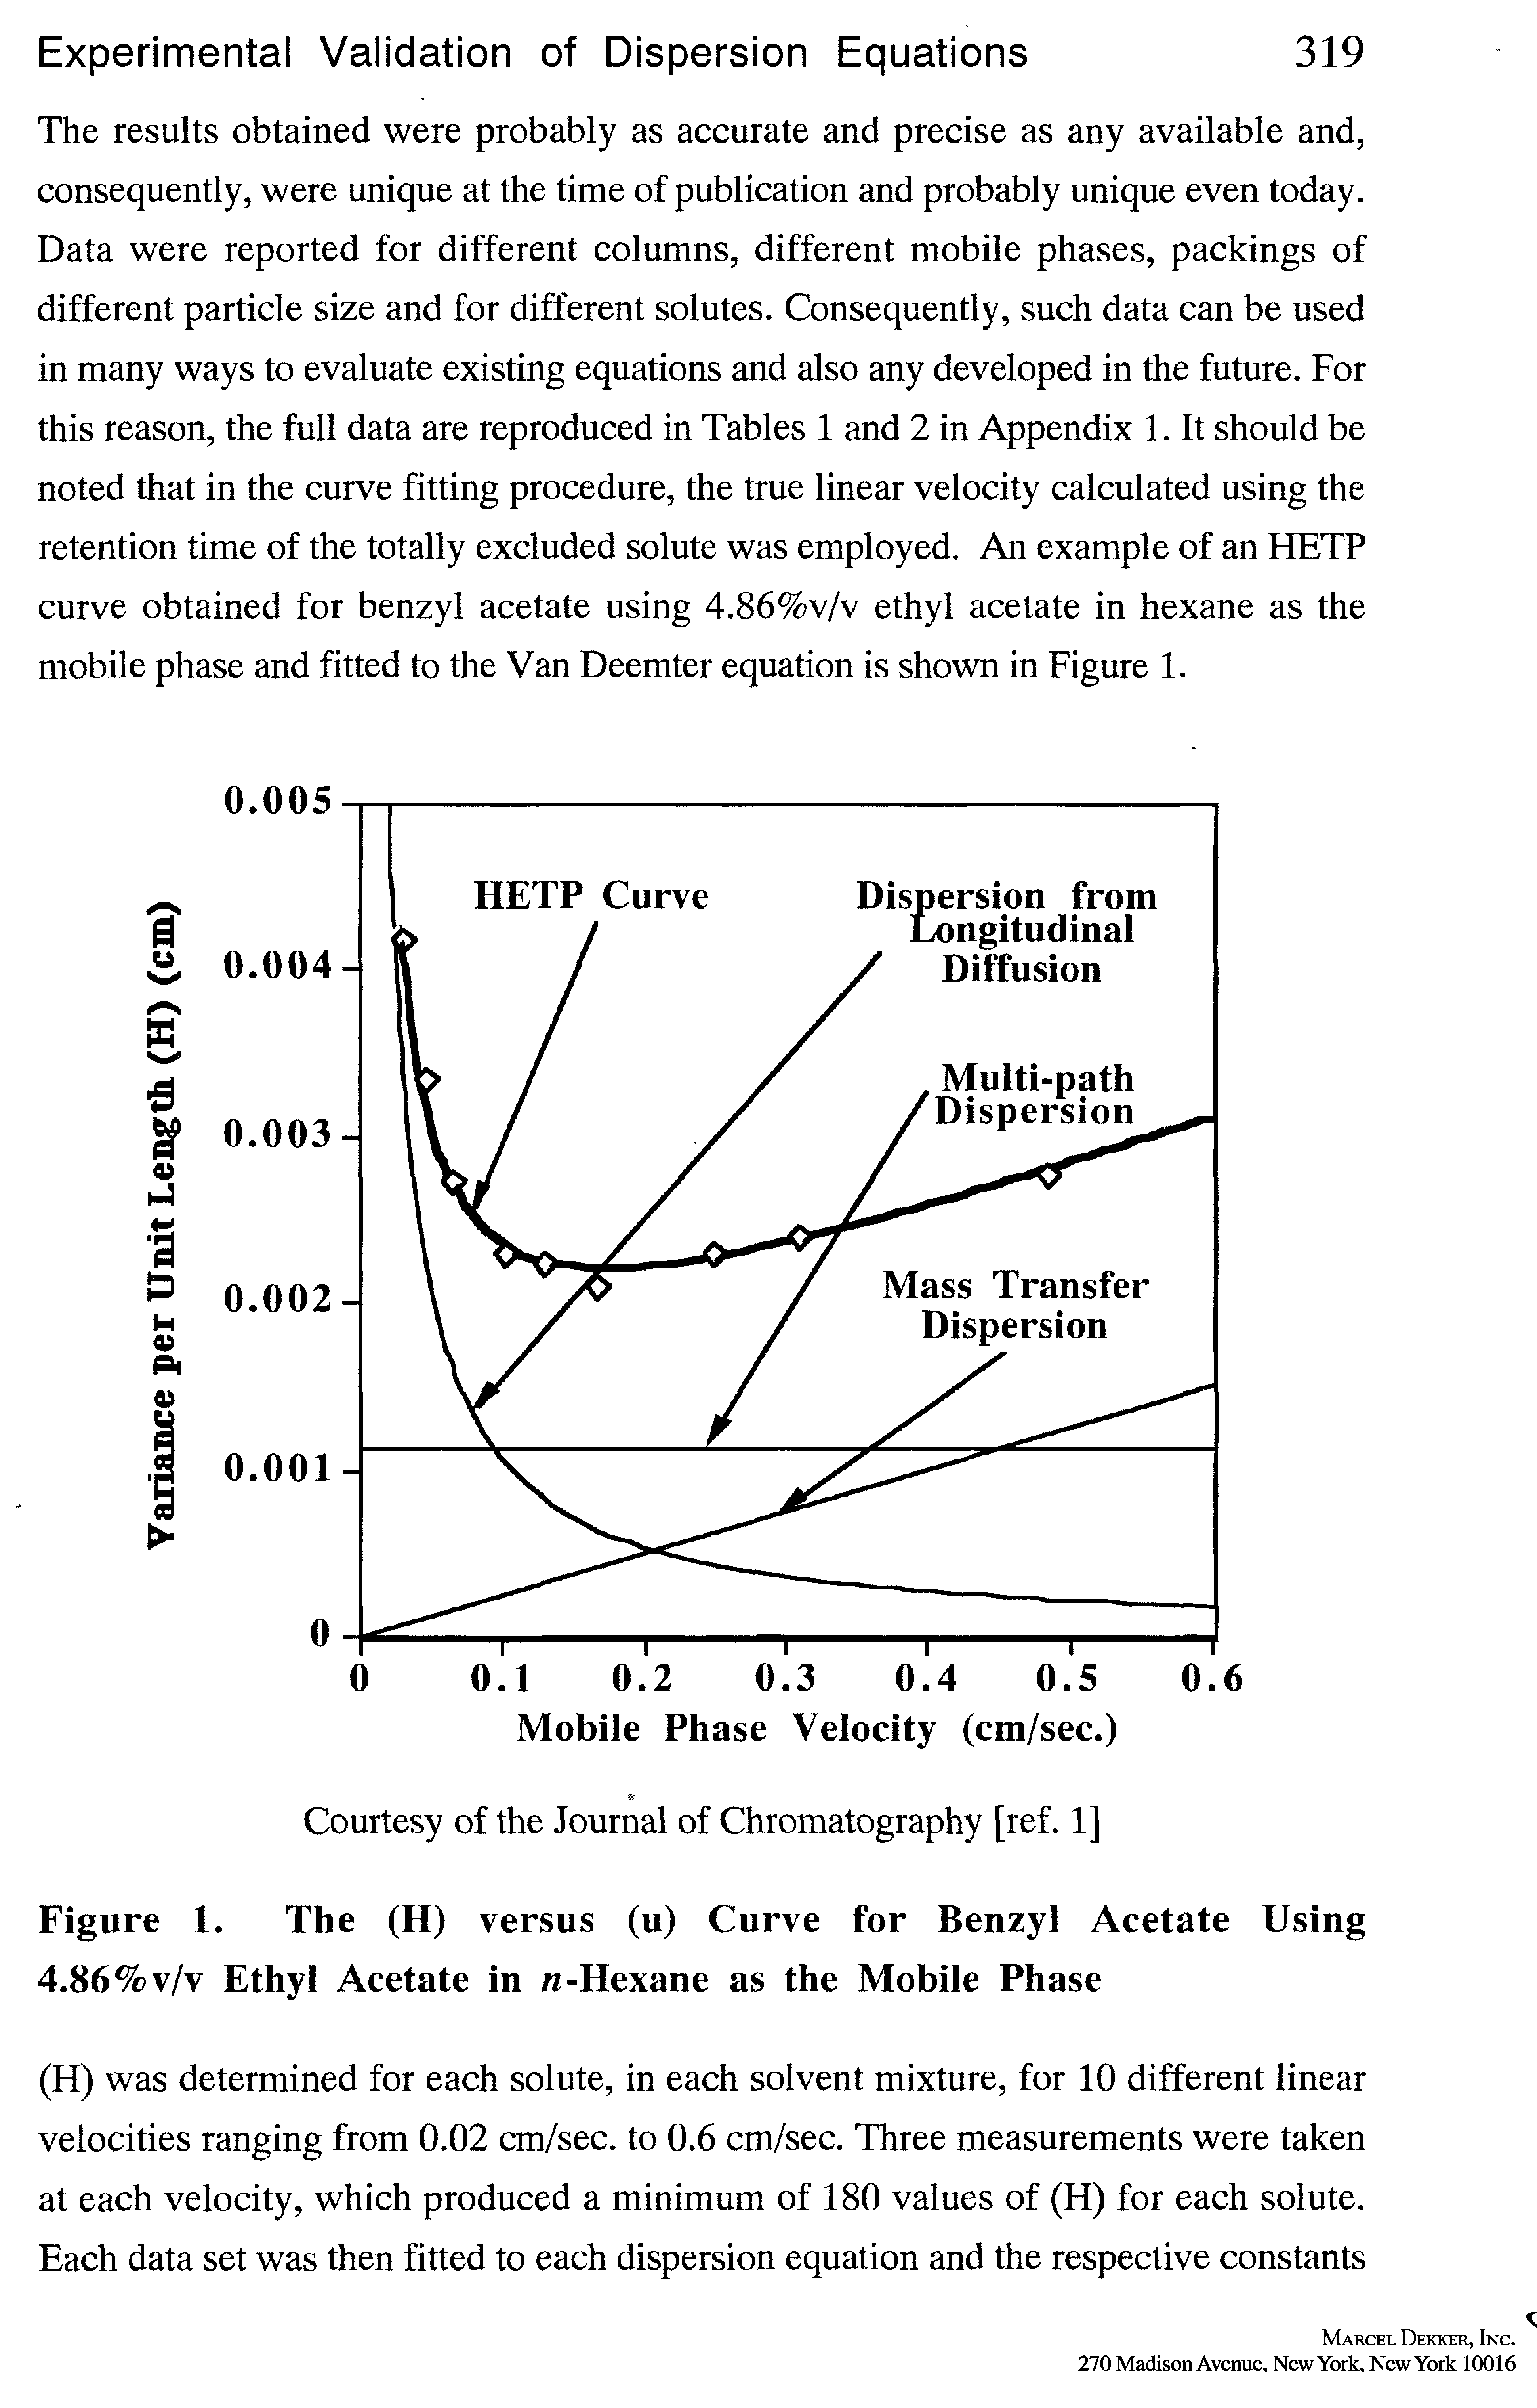 Figure 1. The (H) versus (u) Curve for Benzyl Acetate Using 4.86 %v/v Ethyl Acetate in n-Hexane as the Mobile Phase...